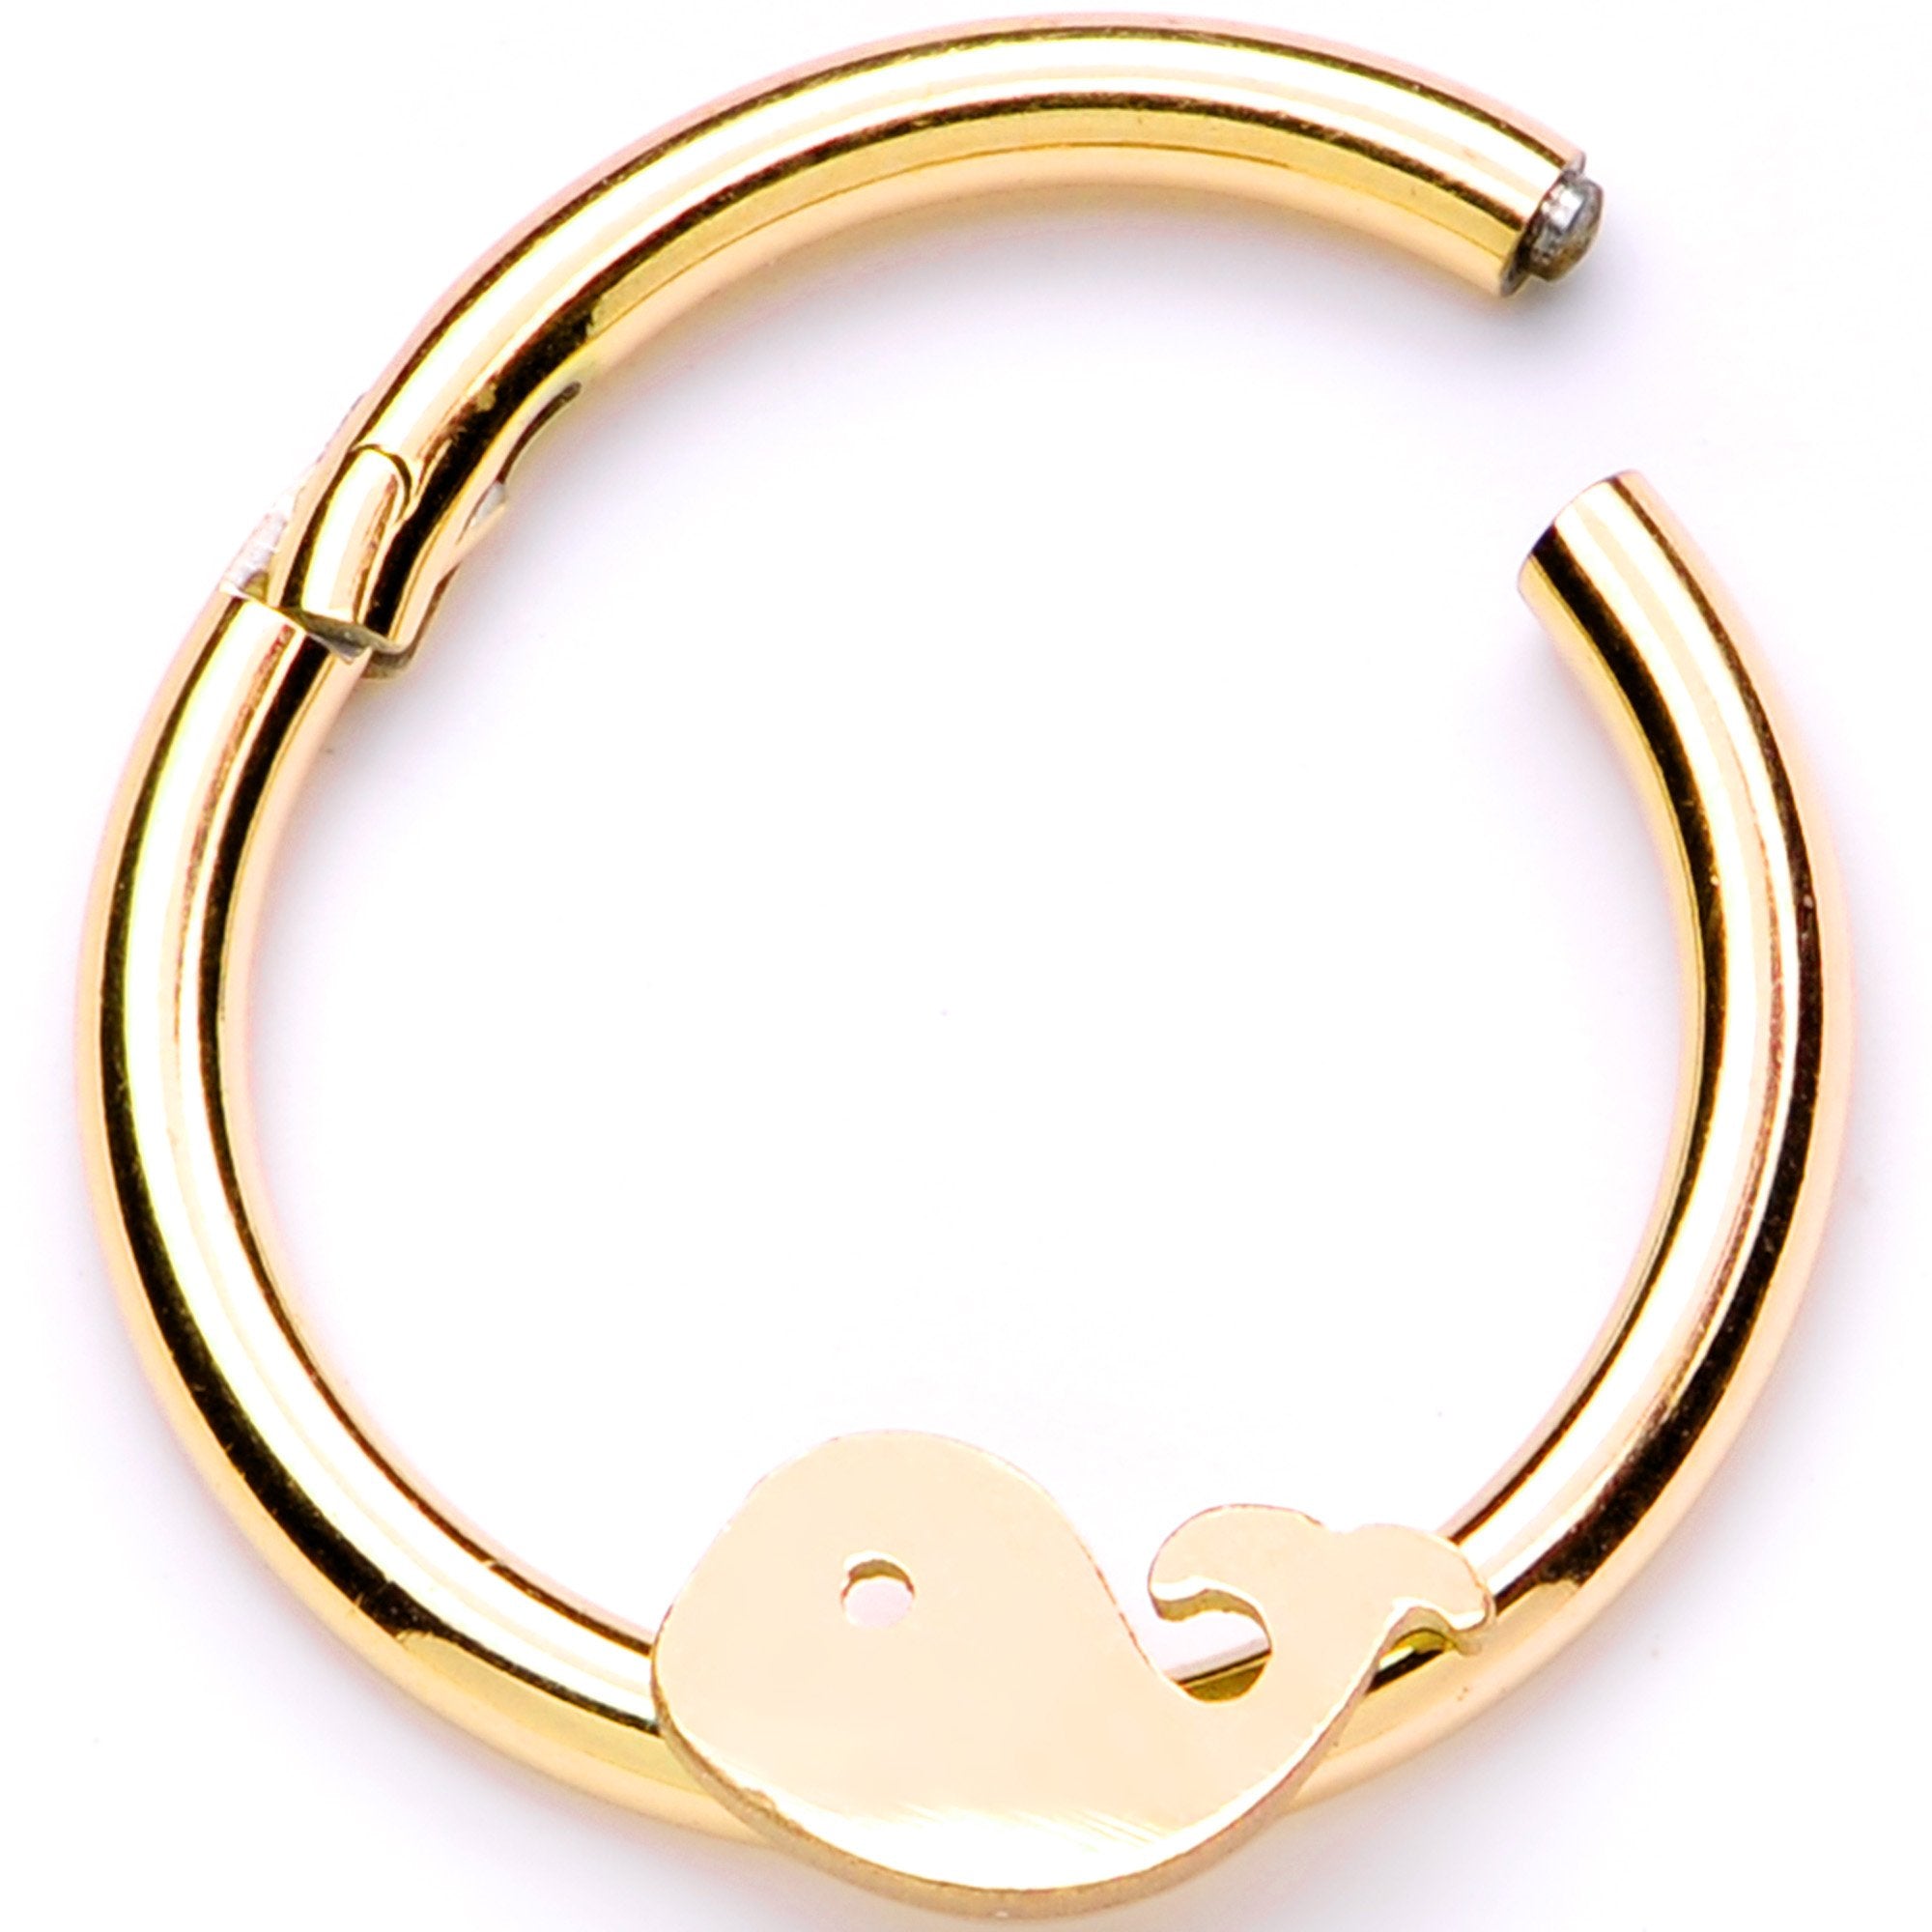 16 Gauge 3/8 Gold Tone Whale of a Hinged Segment Ring